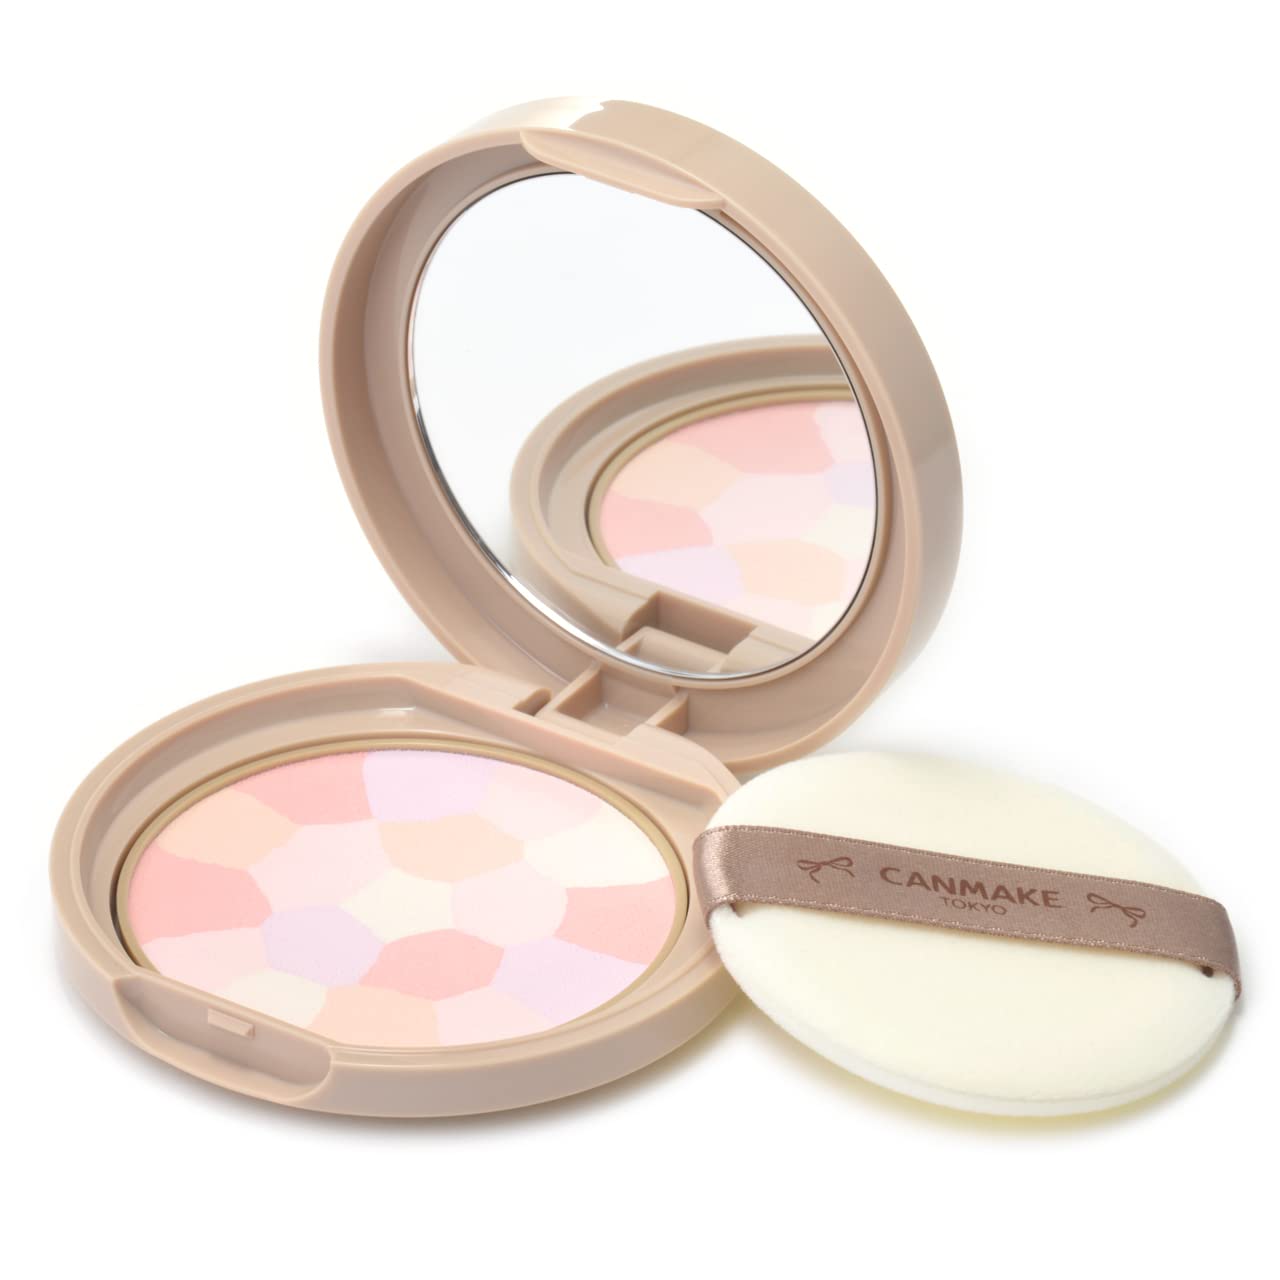 Canmake Marshmallow Finish Face Powder 02 Sakura Tulle 4.0g with Leather - Like Container